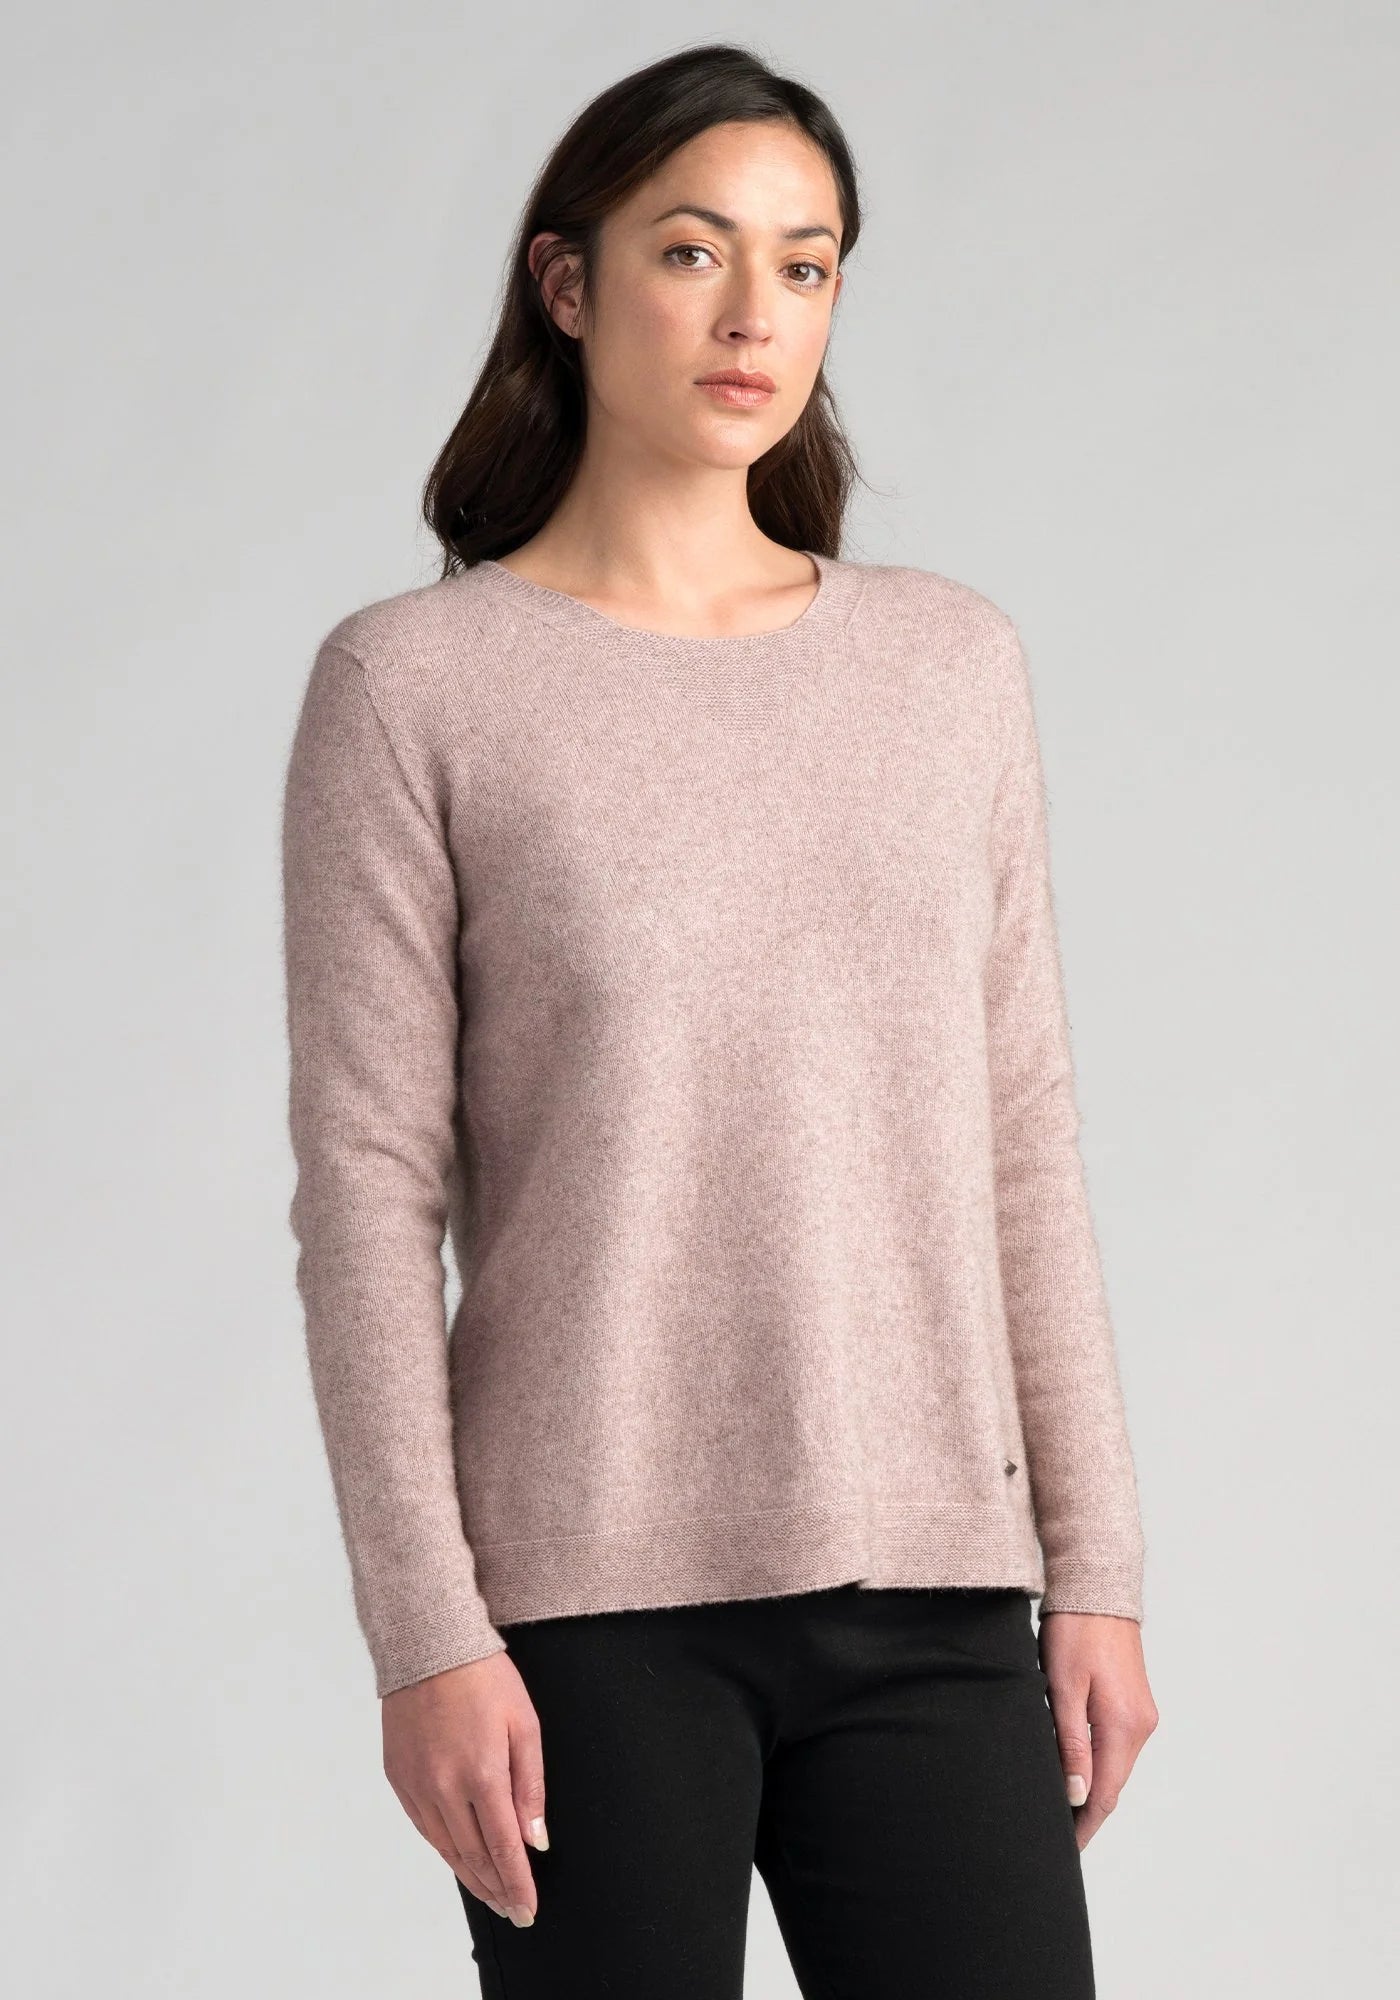 "Wrap yourself in luxury with our light blush pink merino wool sweater. Effortless elegance awaits."